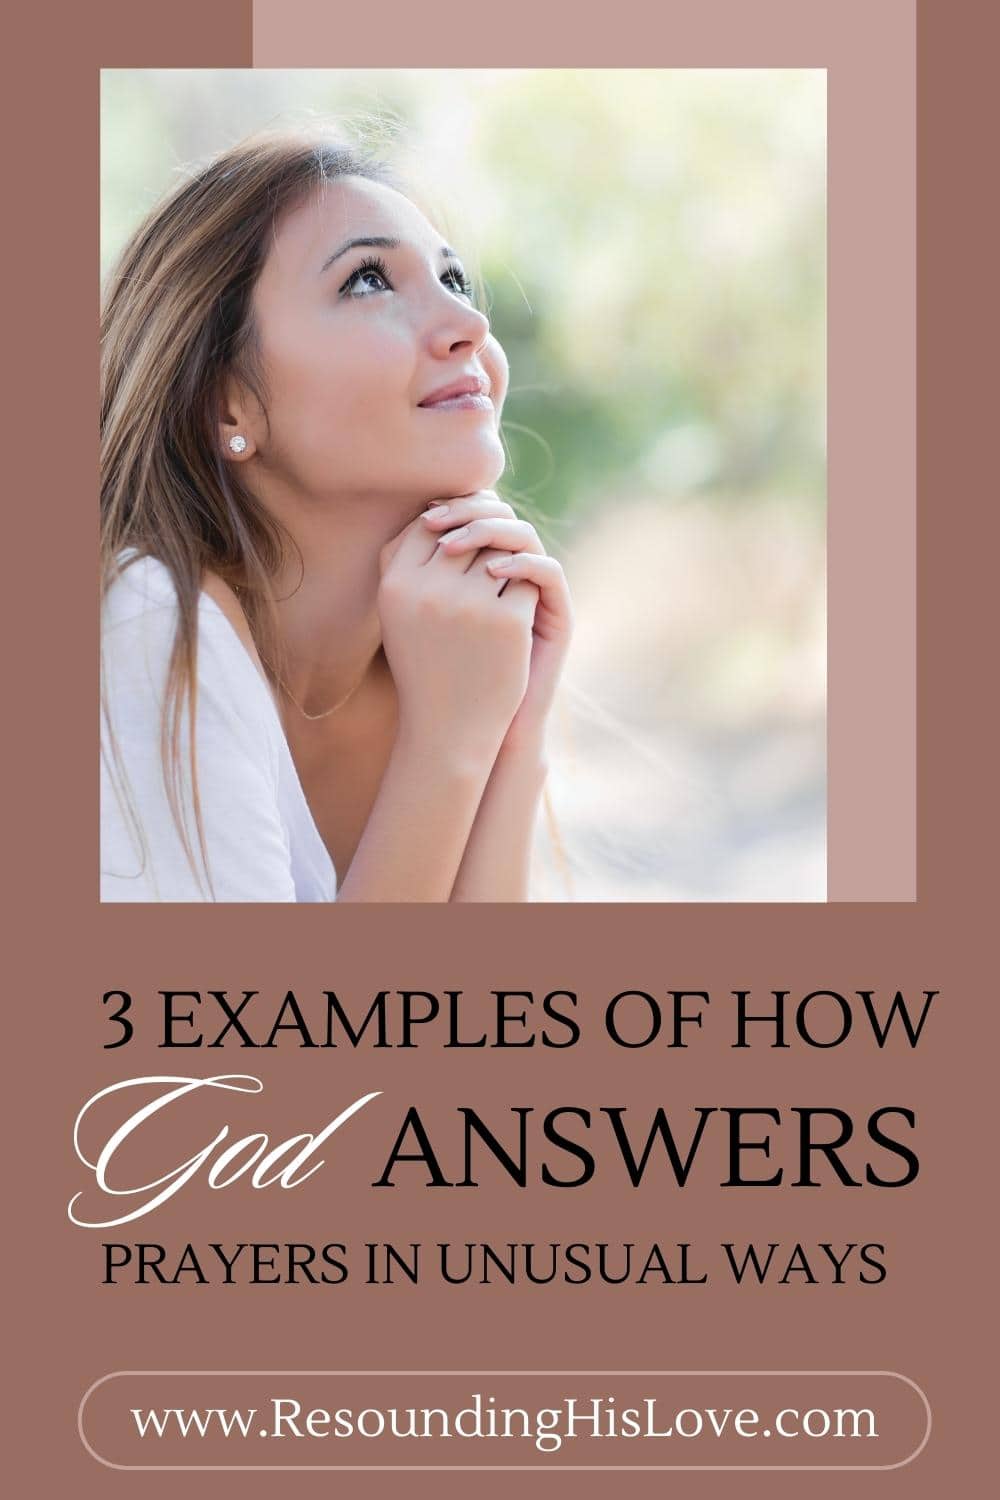 God Answers Prayers: 3 Real Life Unexpected Blessings